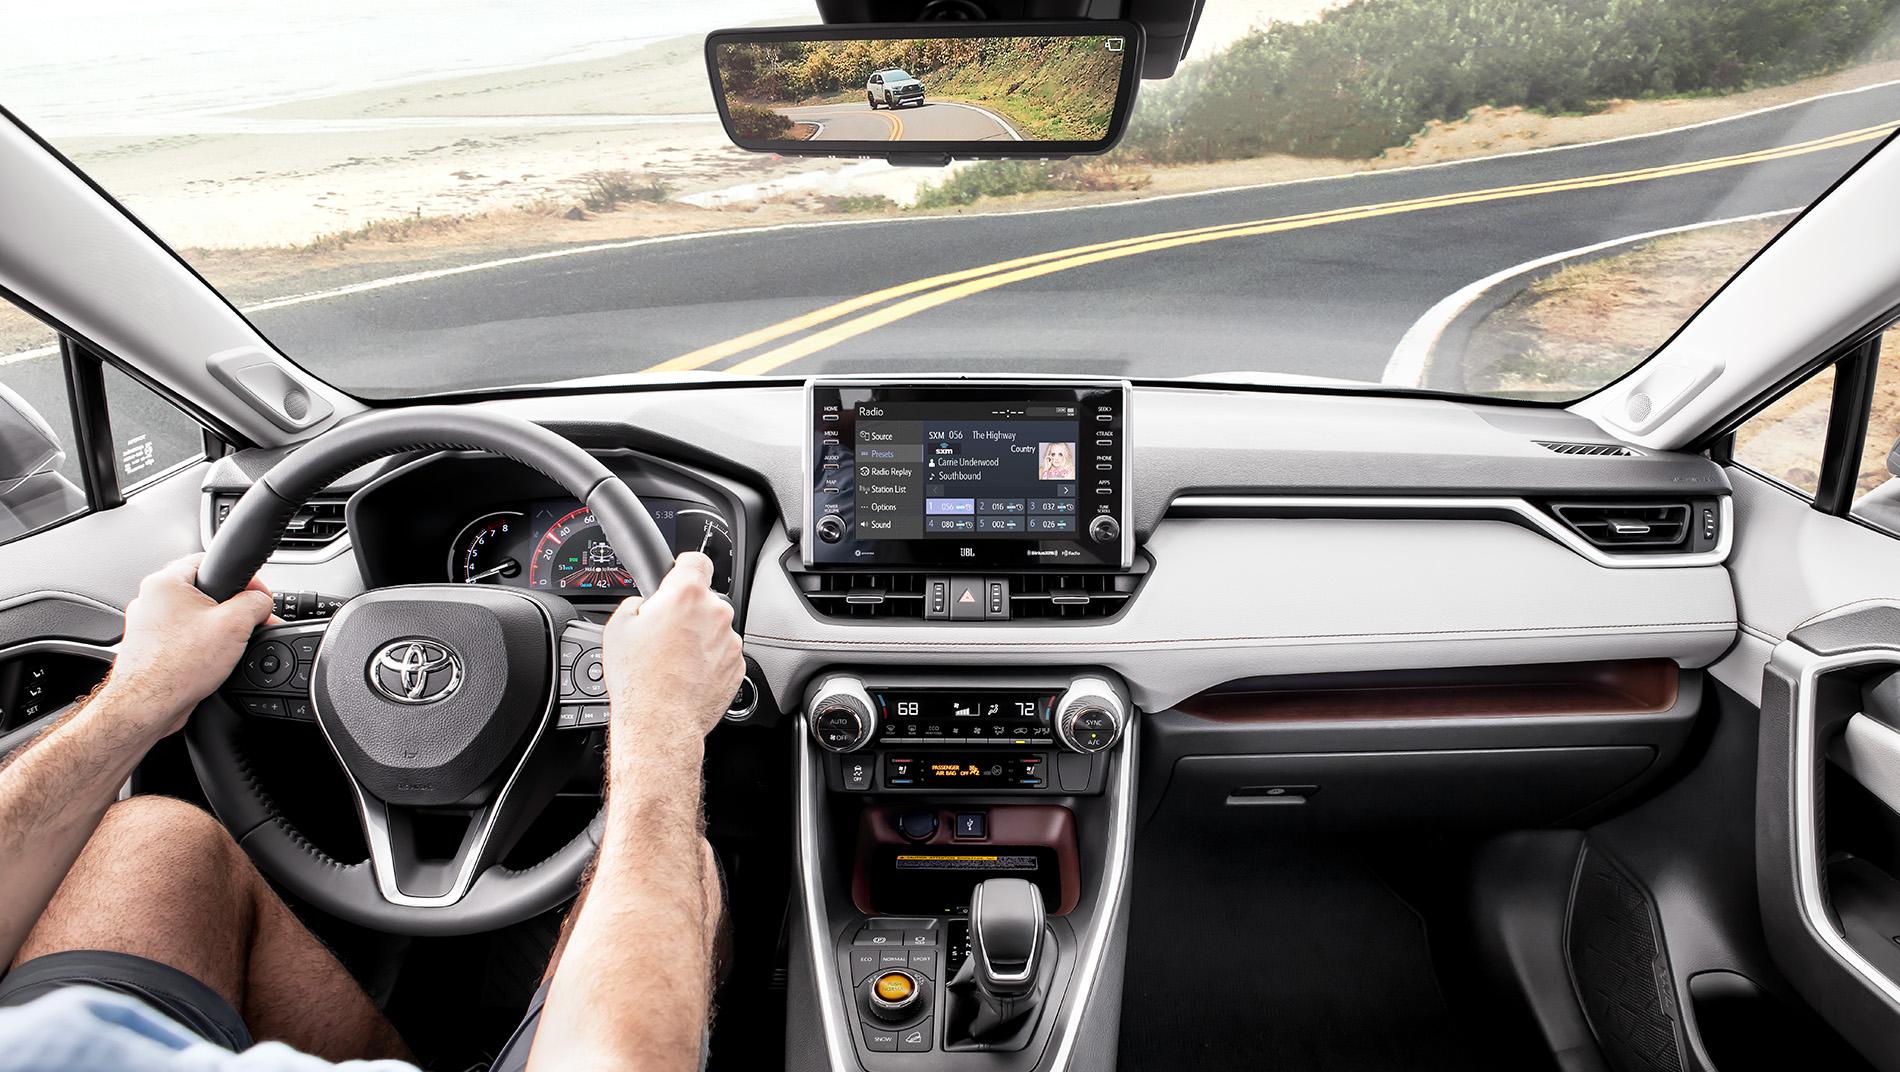 inside a Toyota RAV4 with touchscreen driving on road by the ocean